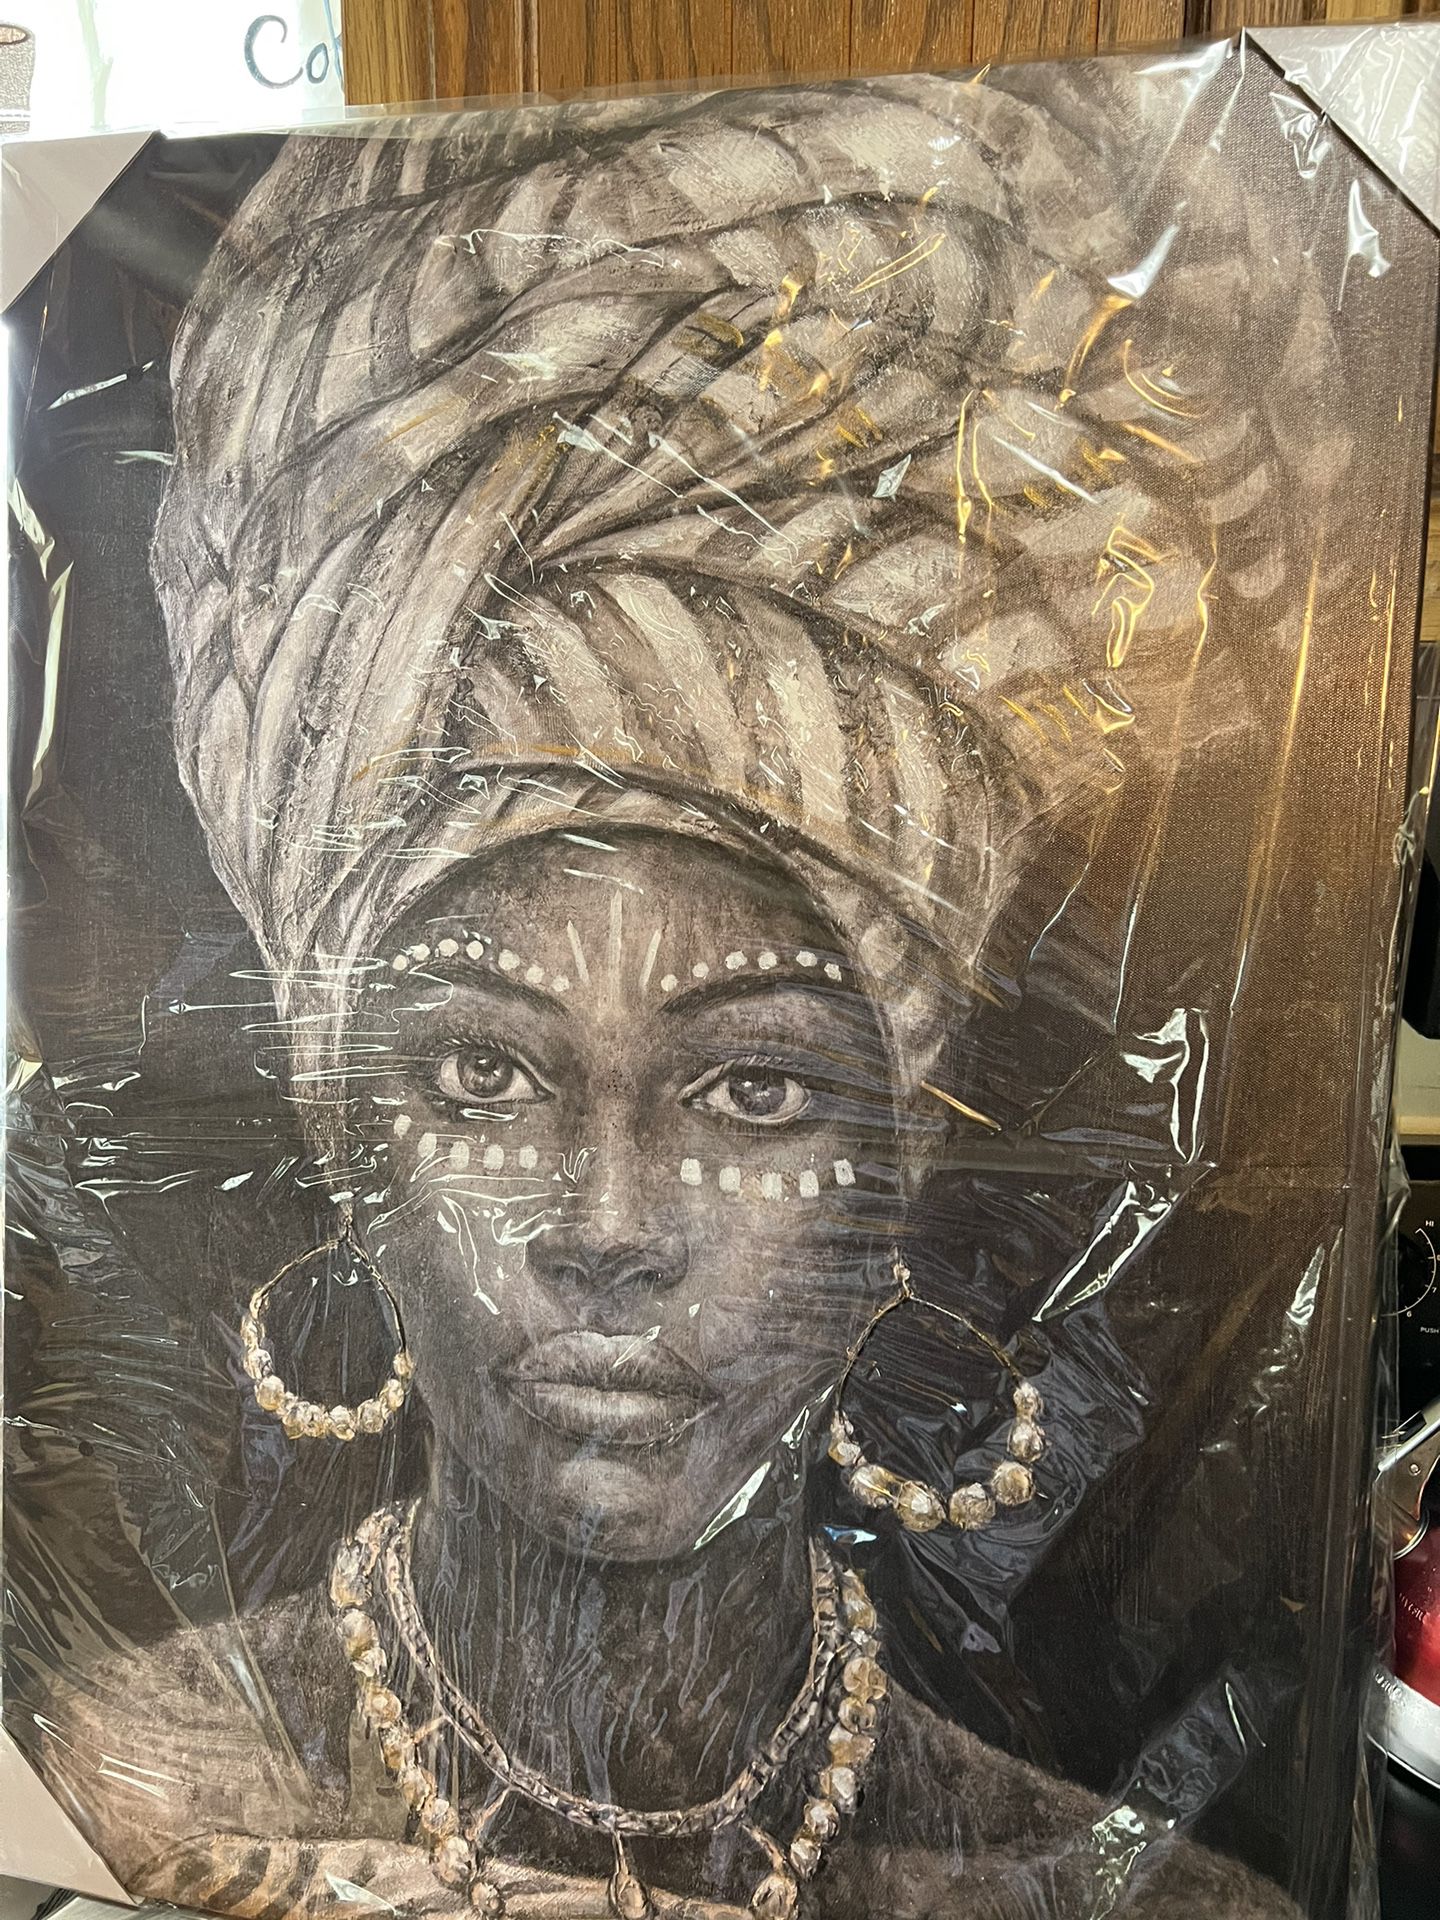 African American Wall Art (size 24” By 32”)